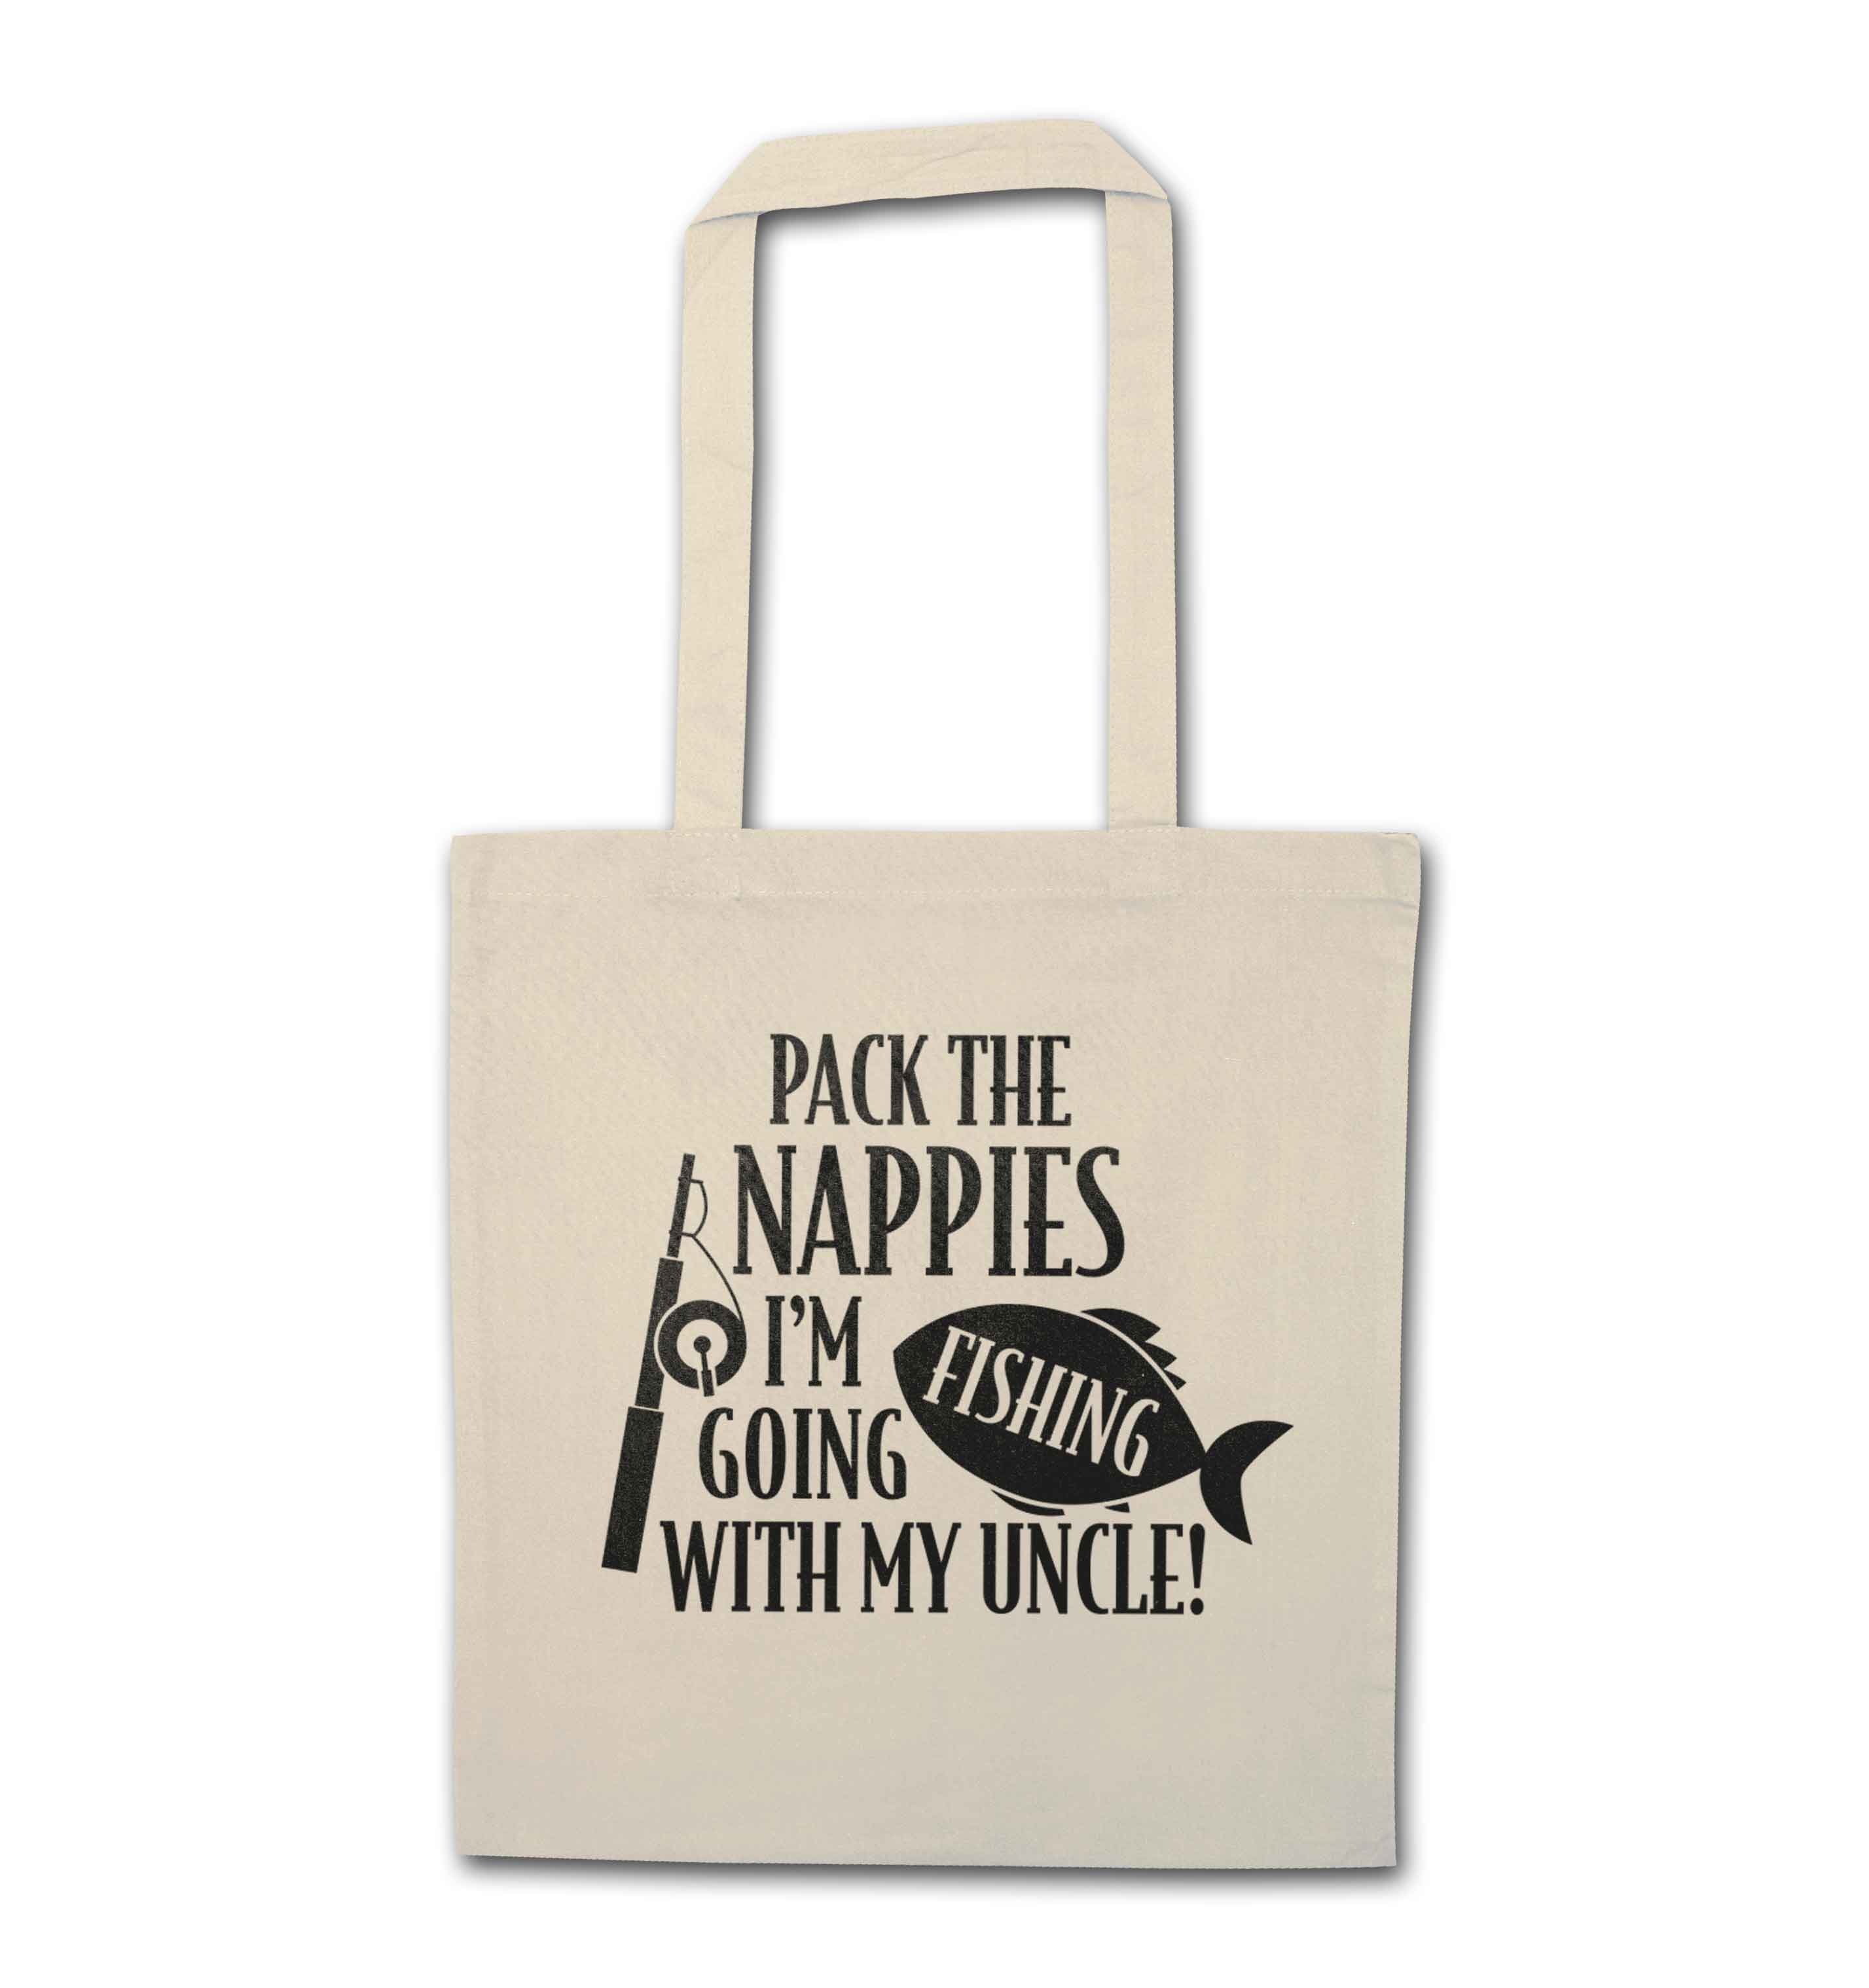 Pack the nappies I'm going fishing my Uncle - Tote Bag